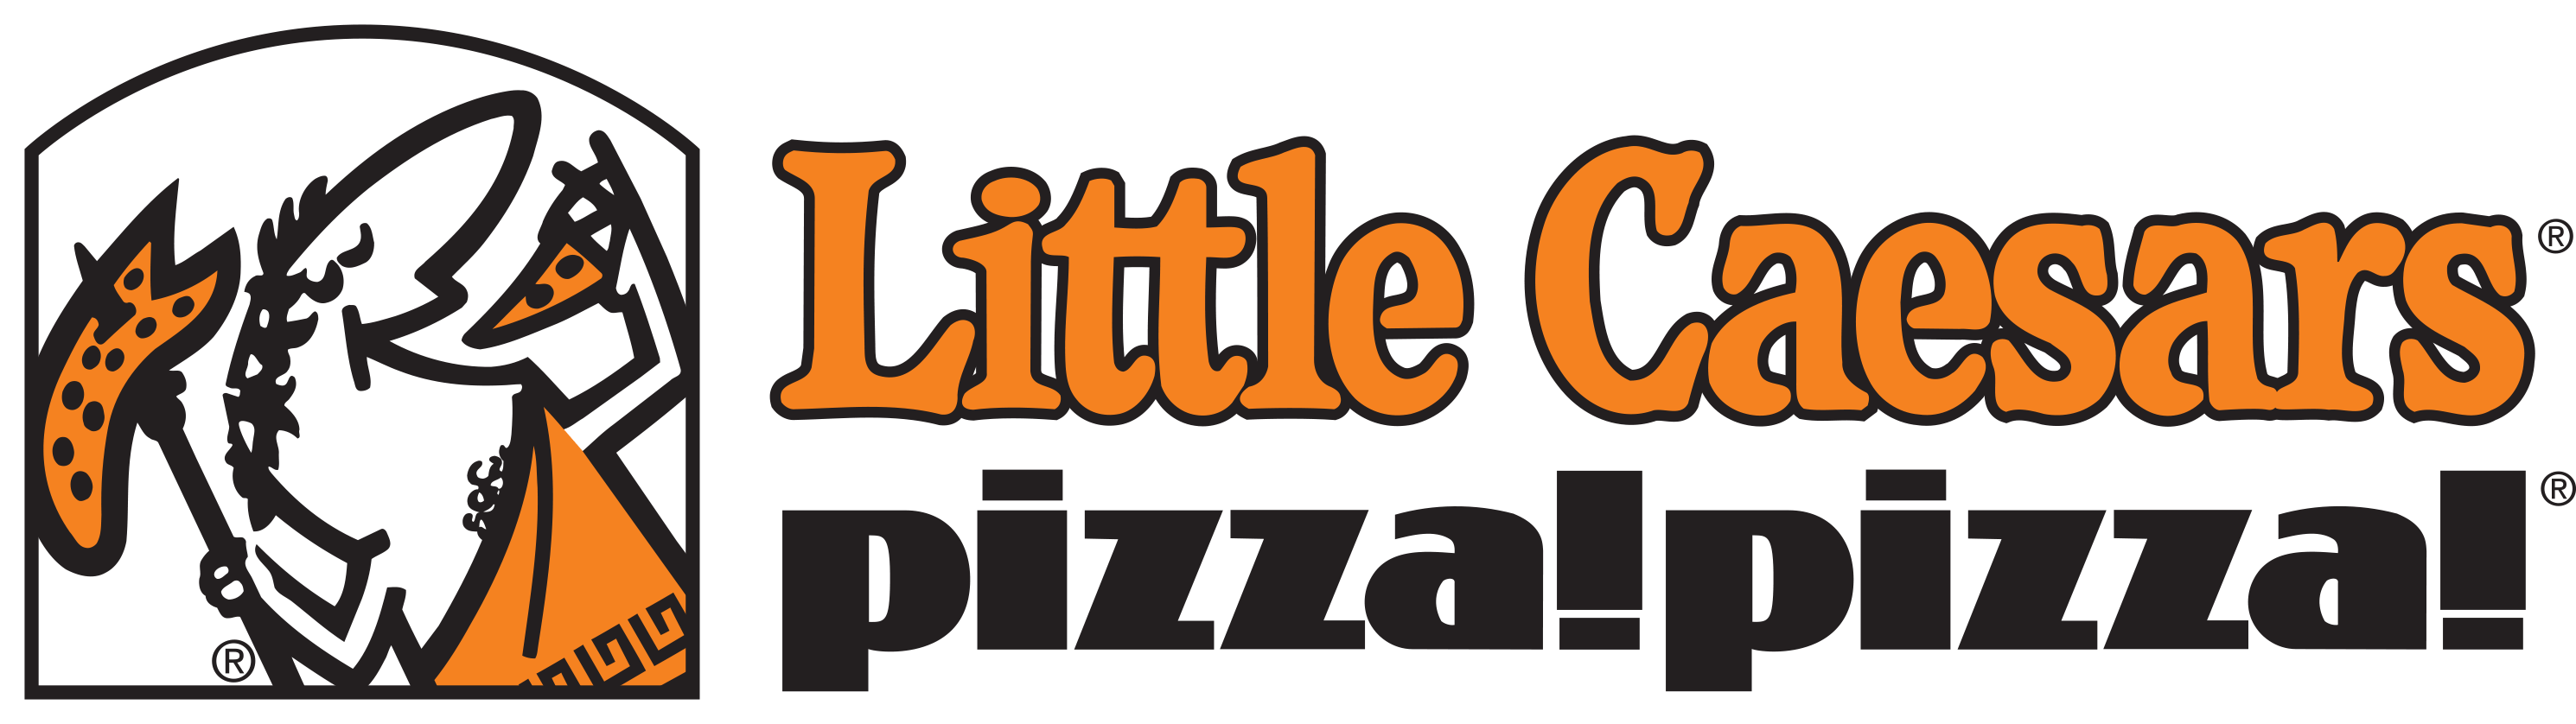 Lil Caesar Pizza Logo - 7 Lessons Radio Can Learn from Little Caesars Founder Mike Ilitch